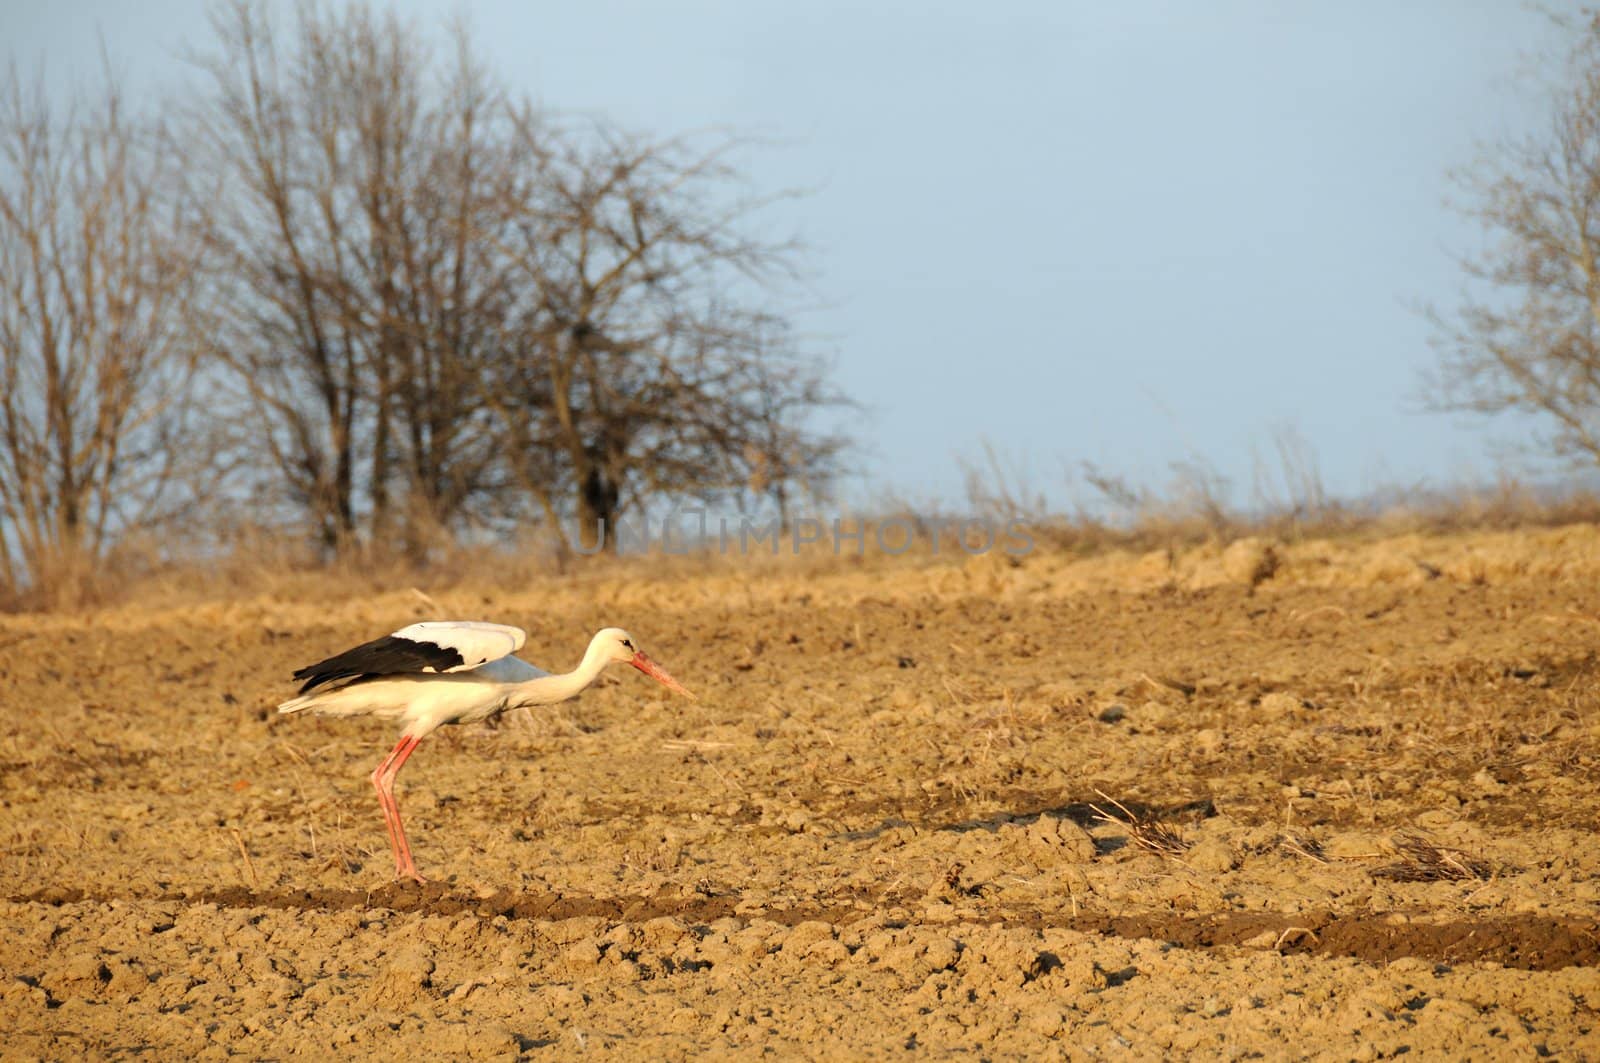 Stork on spring sown field is ready to fly